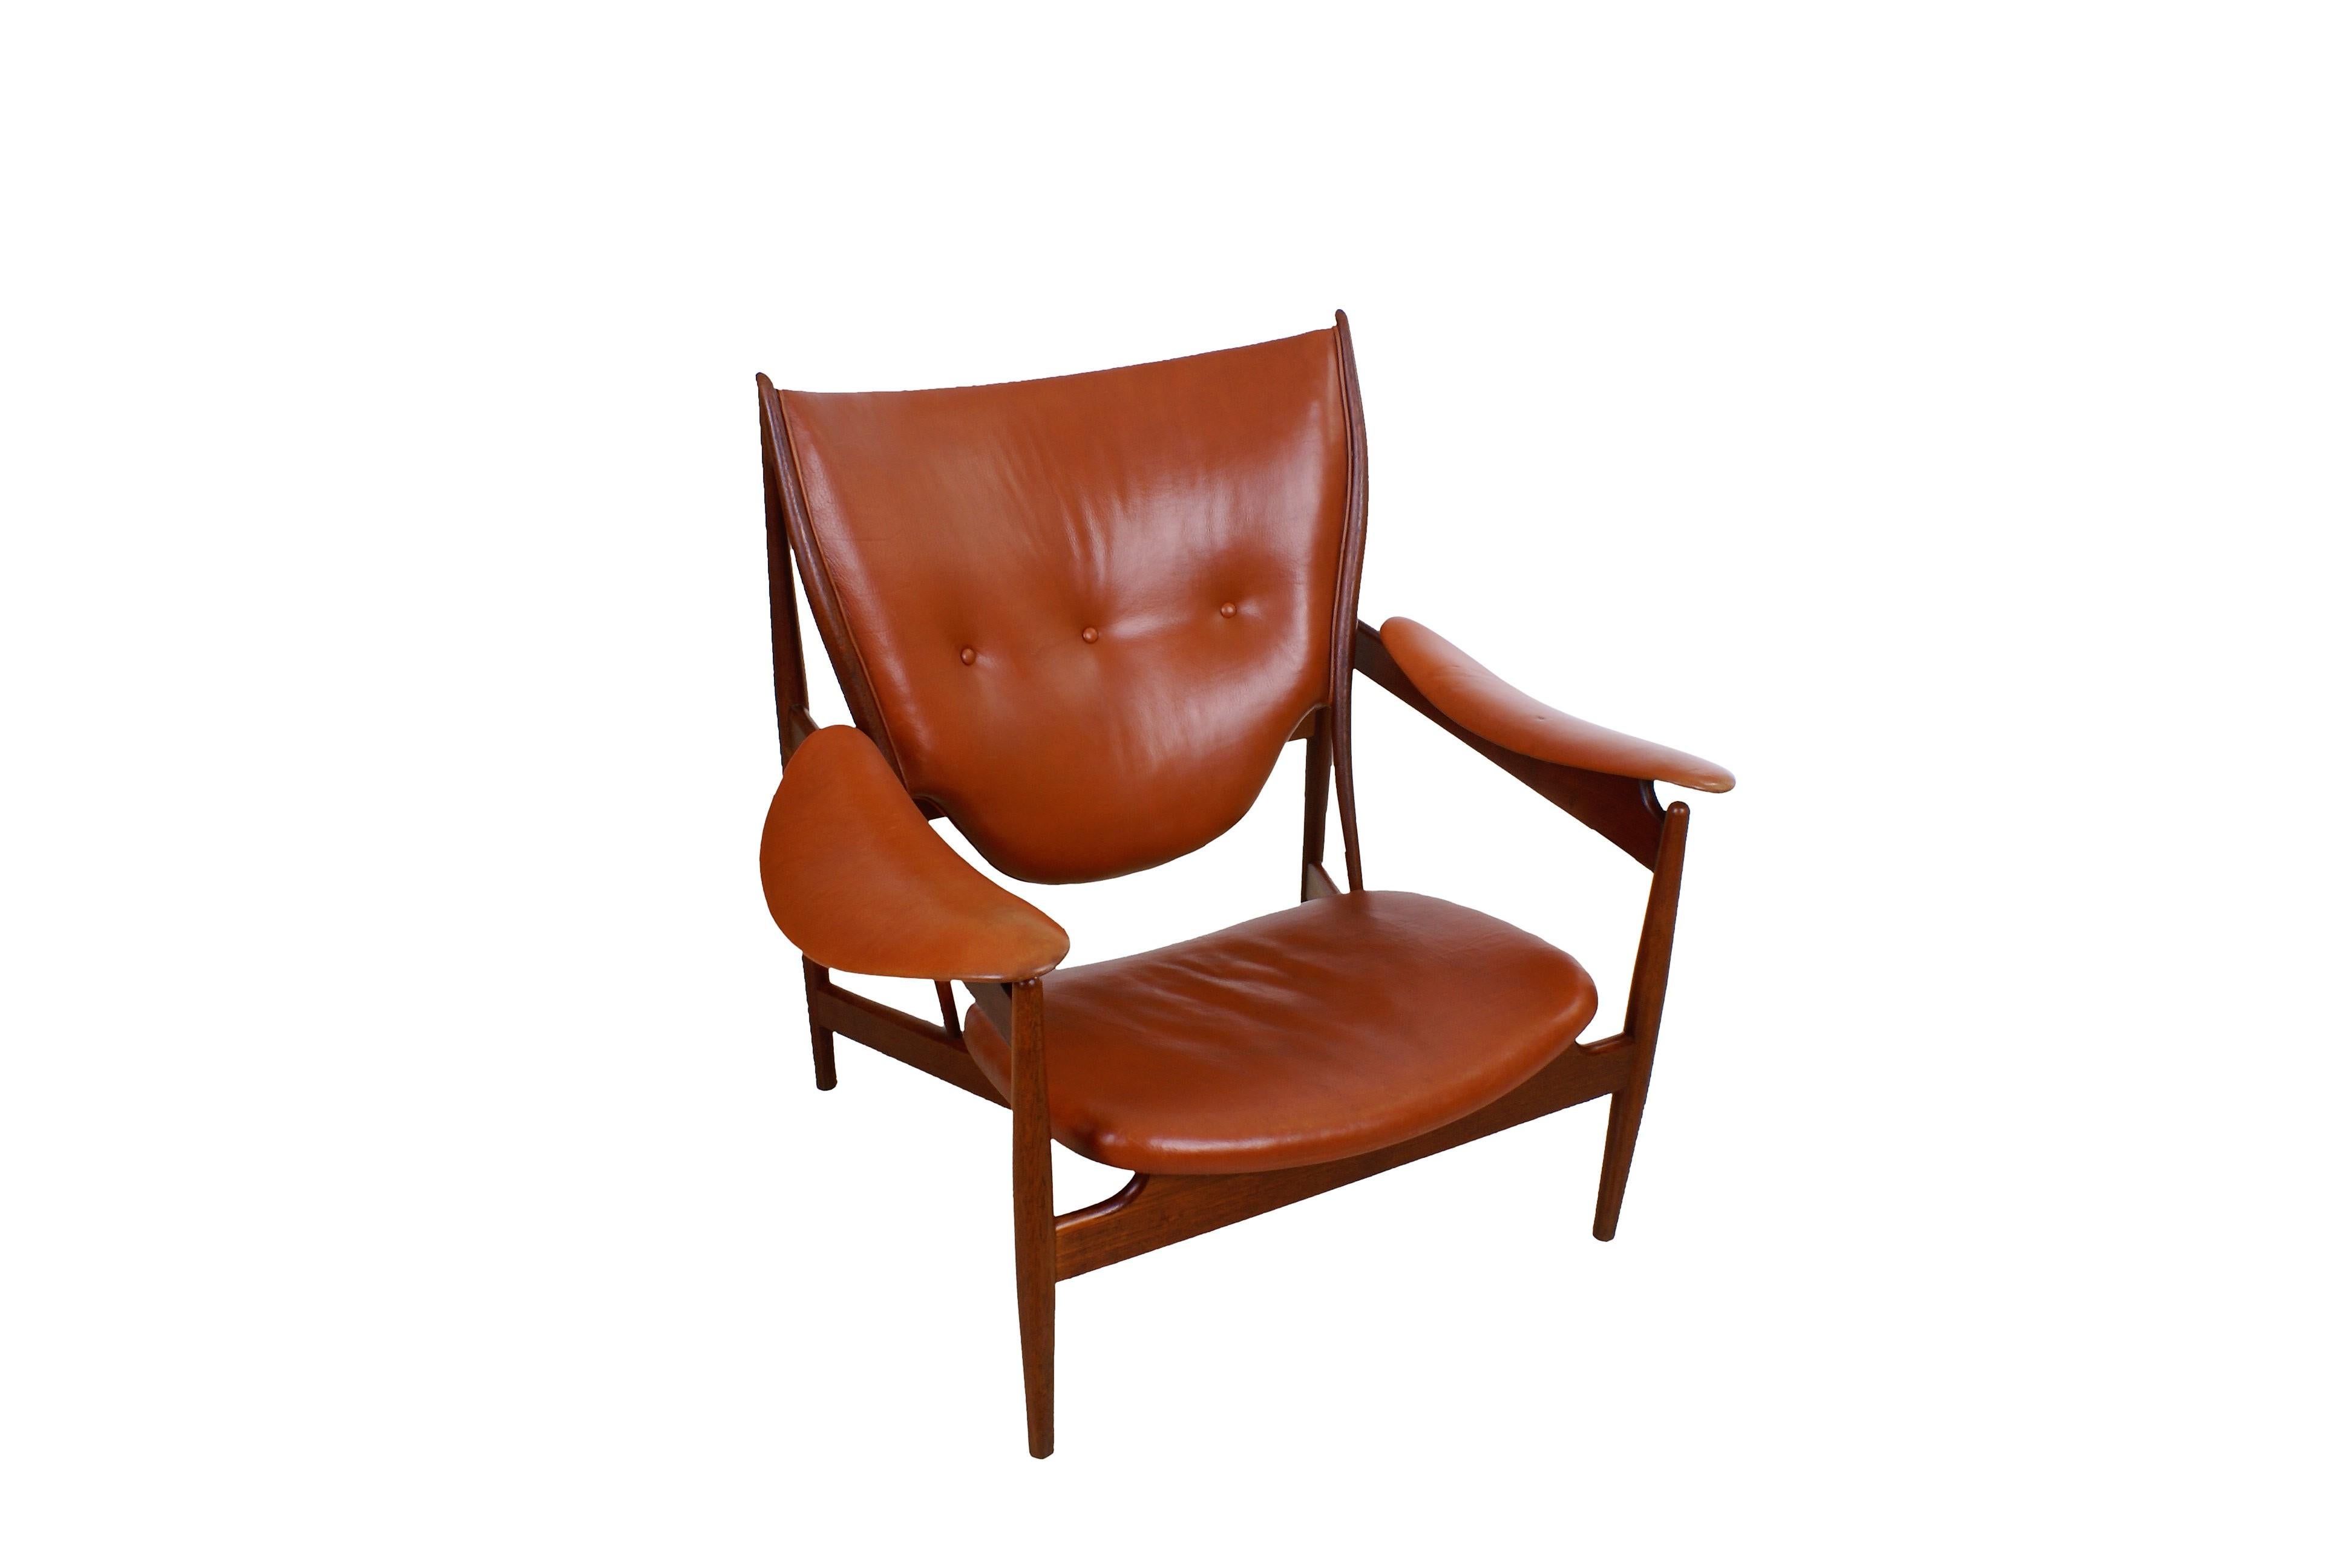 Mid-20th Century Finn Juhl Rare 'Chieftain' Chair in Teak and Leather for Niels Vodder, 1949 For Sale